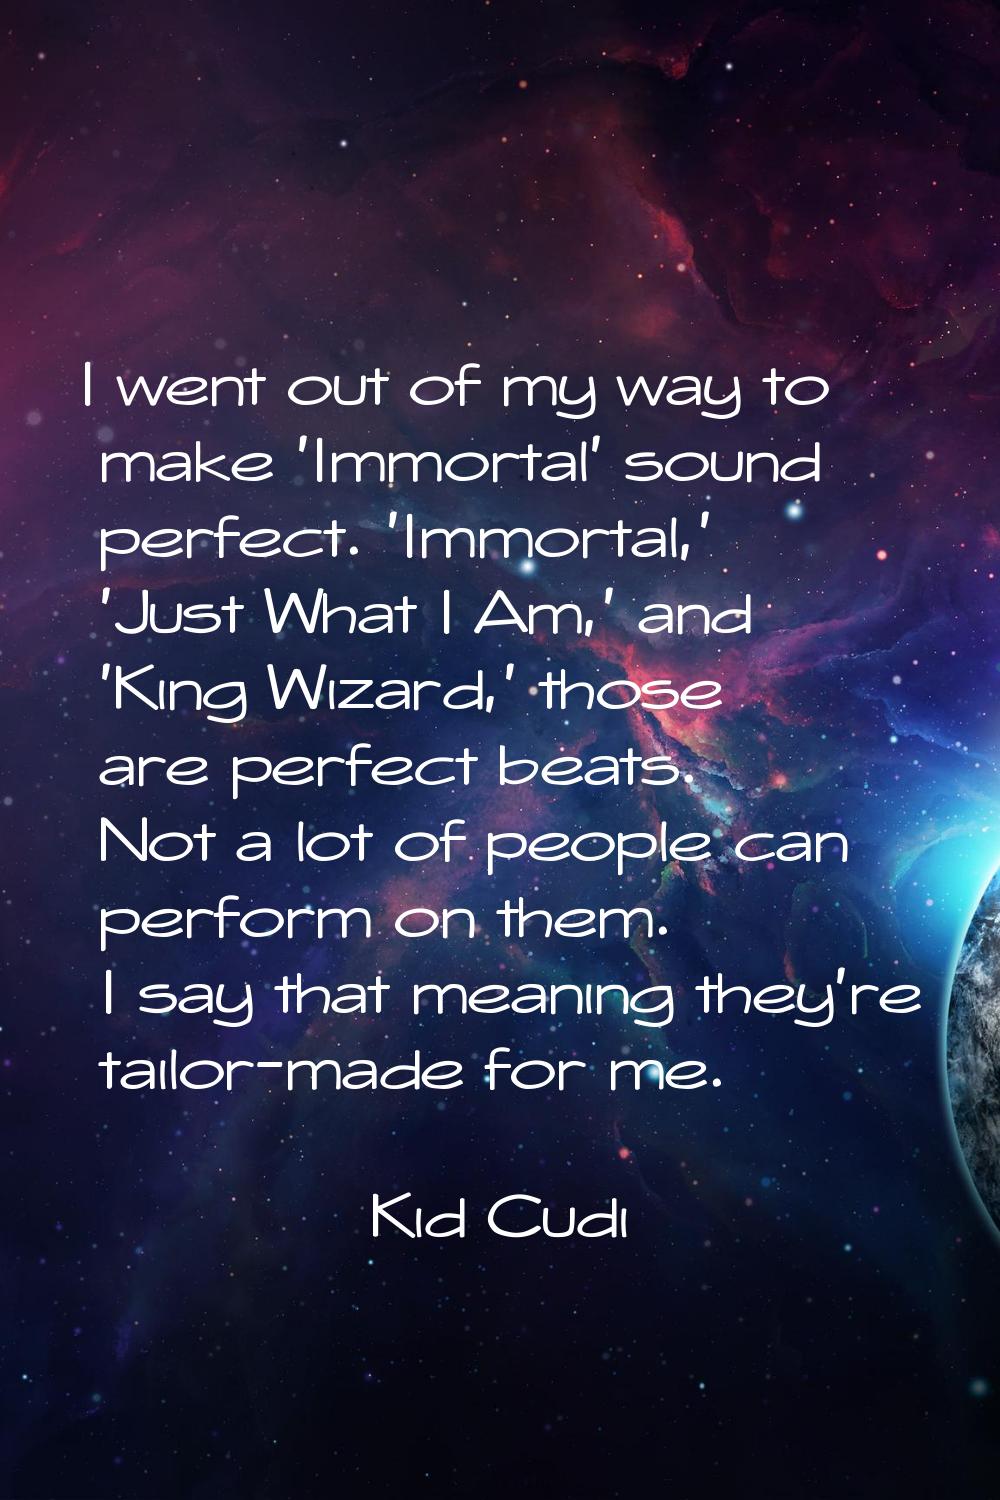 I went out of my way to make 'Immortal' sound perfect. 'Immortal,' 'Just What I Am,' and 'King Wiza